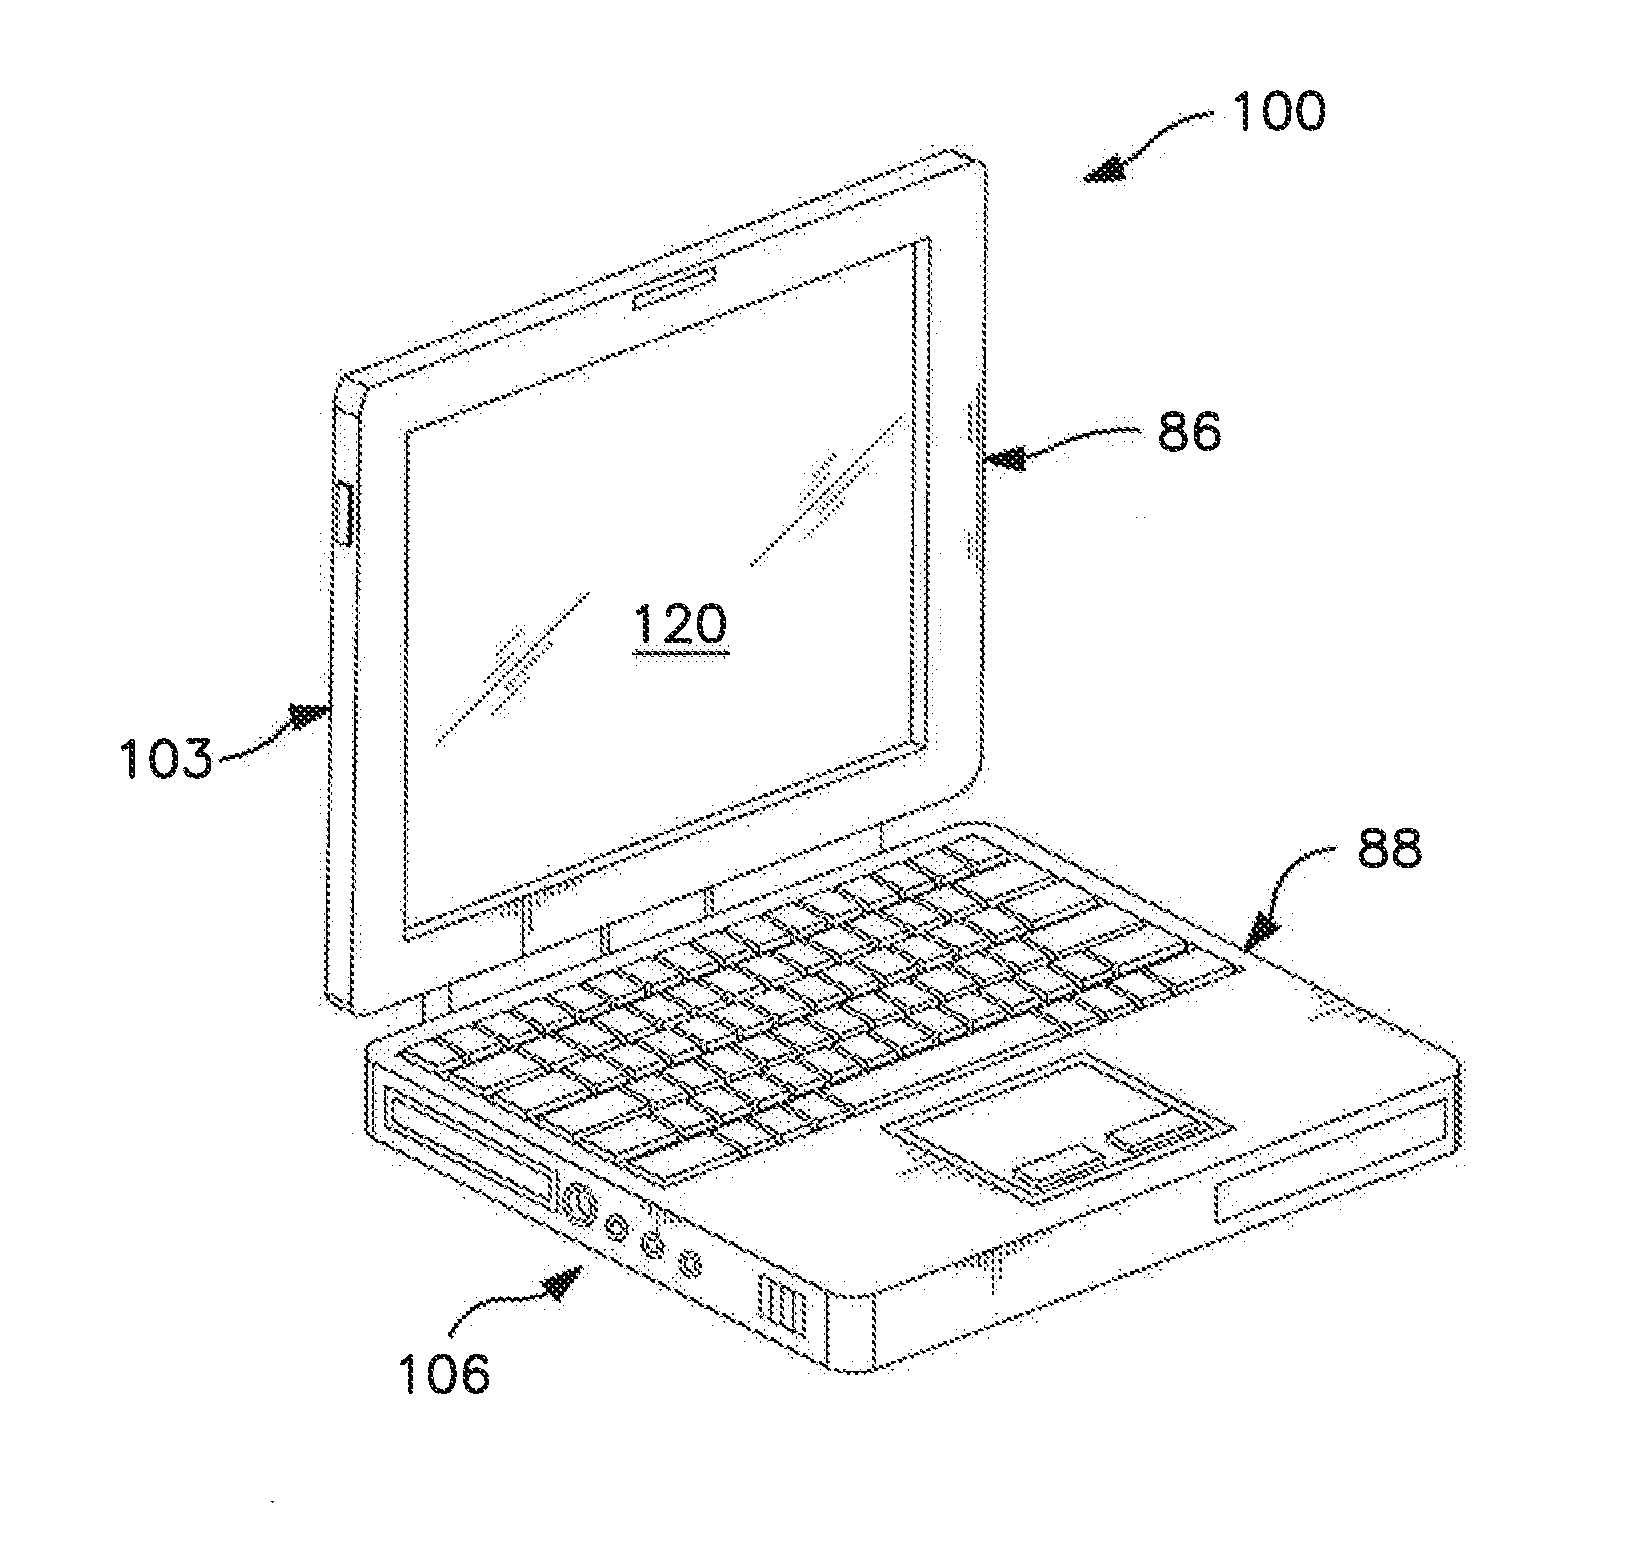 Molded Part for Use in a Portable Electronic Device